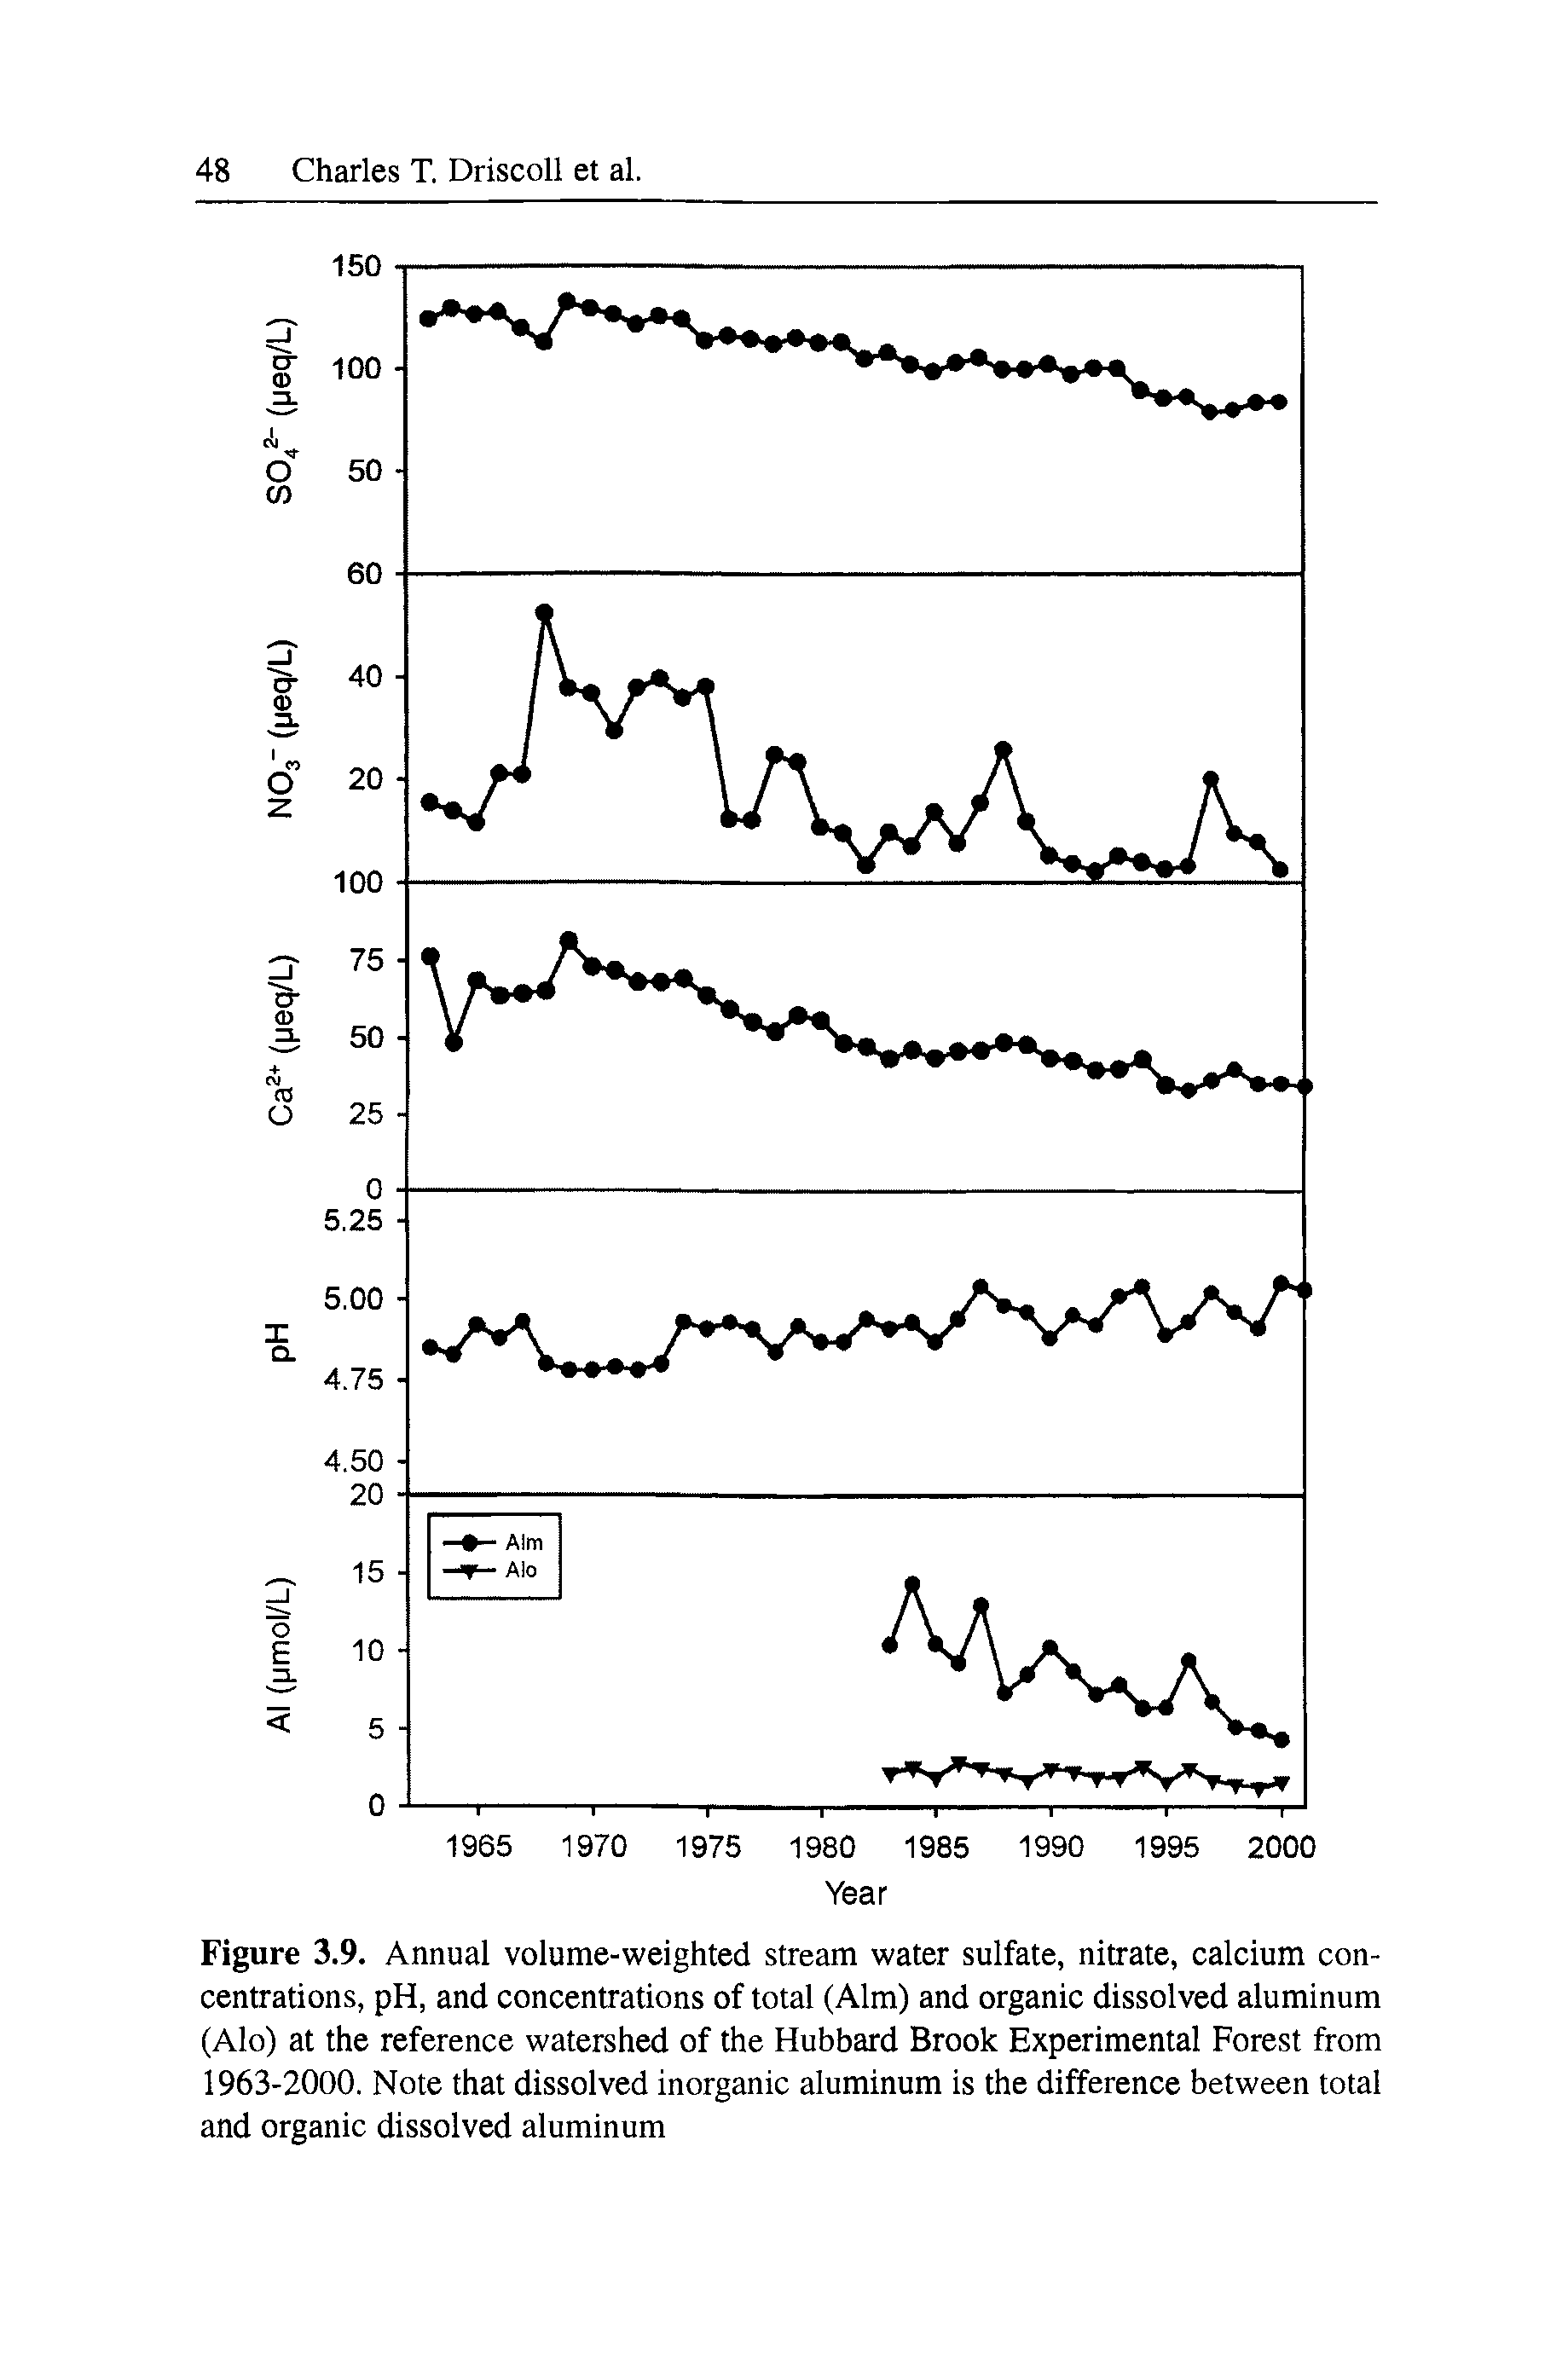 Figure 3.9. Annual volume-weighted stream water sulfate, nitrate, calcium concentrations, pH, and concentrations of total (Aim) and organic dissolved aluminum (Alo) at the reference watershed of the Hubbard Brook Experimental Forest from 1963-2000. Note that dissolved inorganic aluminum is the difference between total and organic dissolved aluminum...